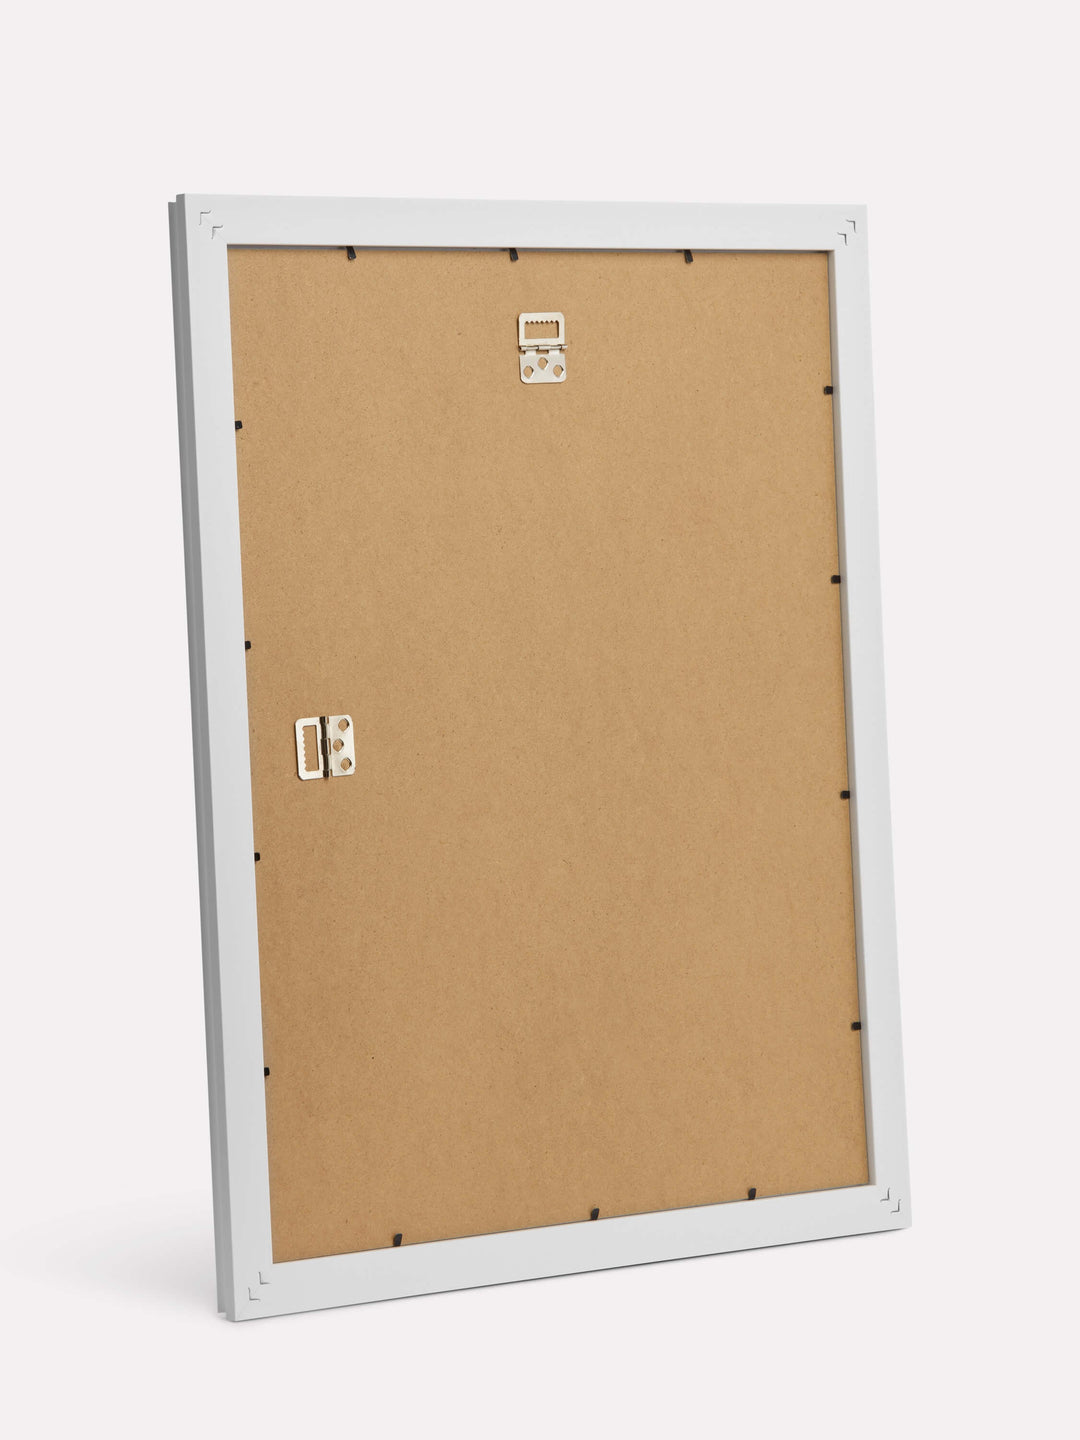 16x20-inch Decorative Frame, White - Back view